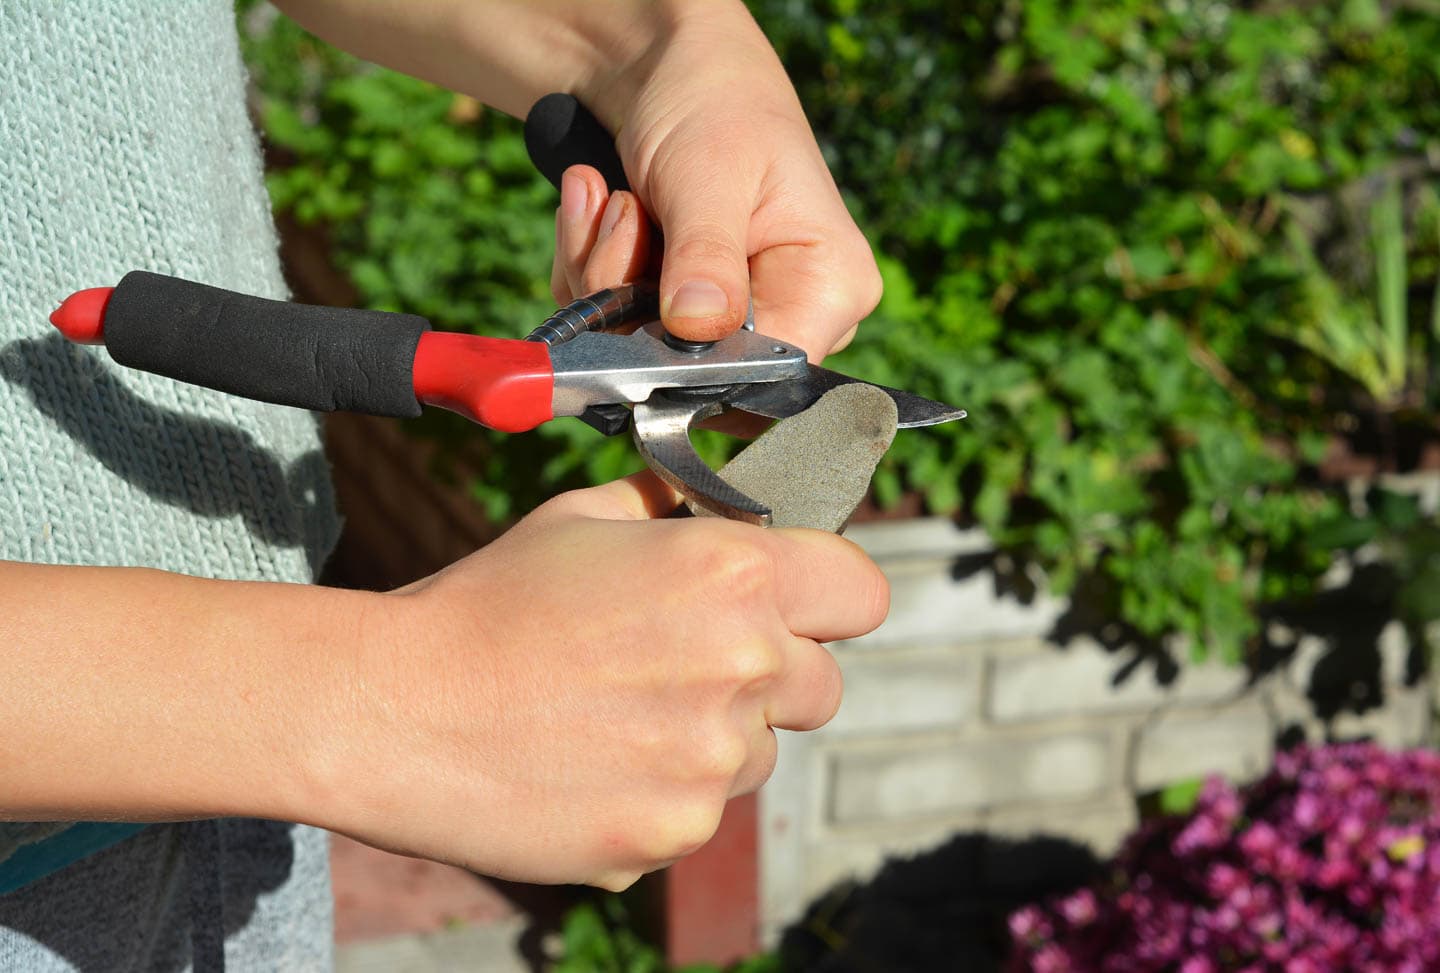 Gardening shears being sharpened with a sharpening stone